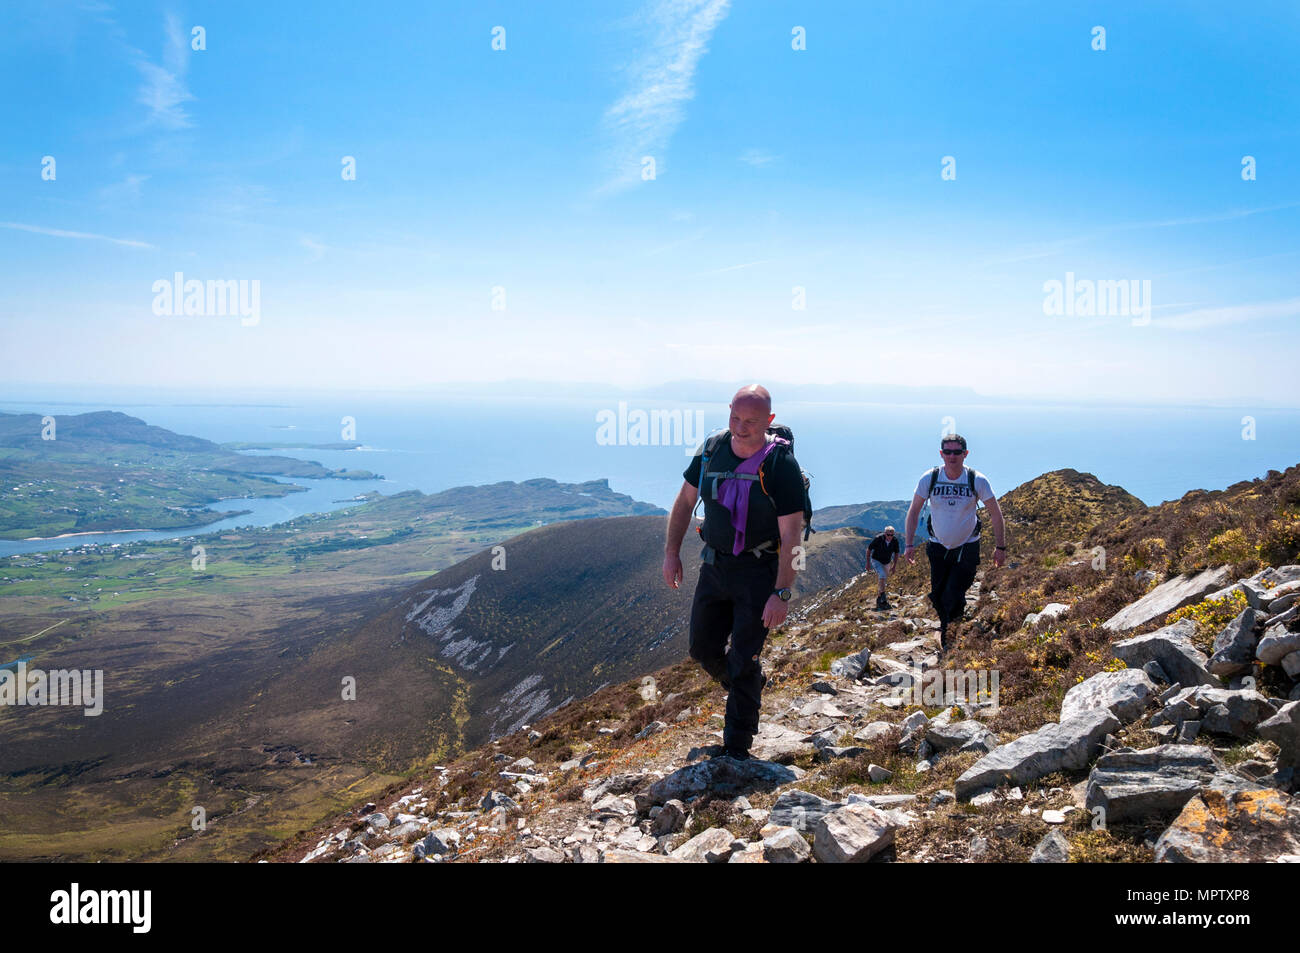 Hill walkers on Sliabh Liag, Slieve League or Slieve Liag, a mountain on the Atlantic coast of County Donegal, Ireland. Stock Photo